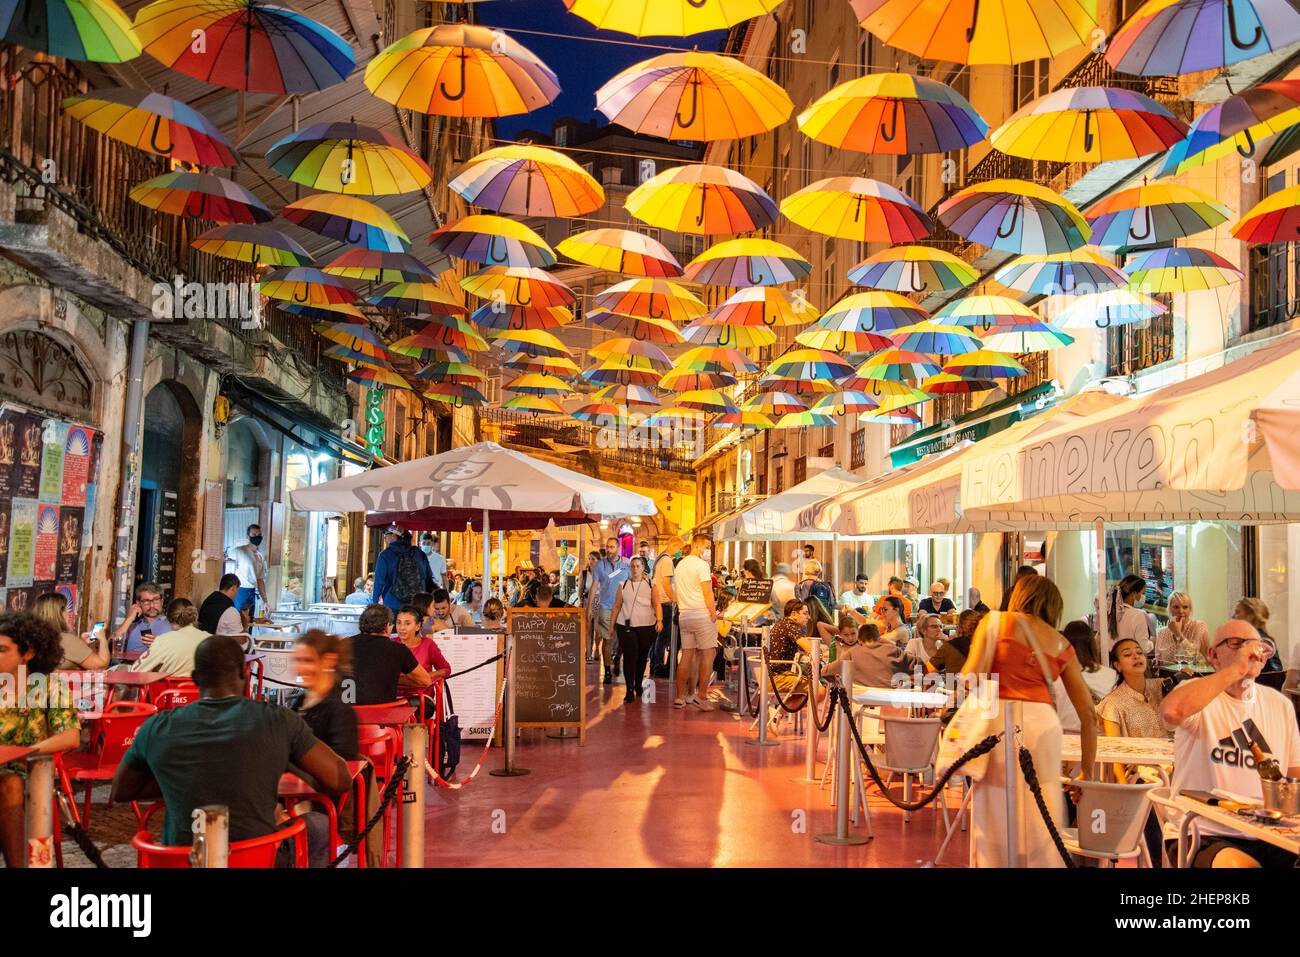 rainbow Umbrellas at the Party Street of Nova do Carvalho in Baixa in the  City of Lisbon in Portugal. Portugal, Lisbon, October, 2021 Stock Photo -  Alamy